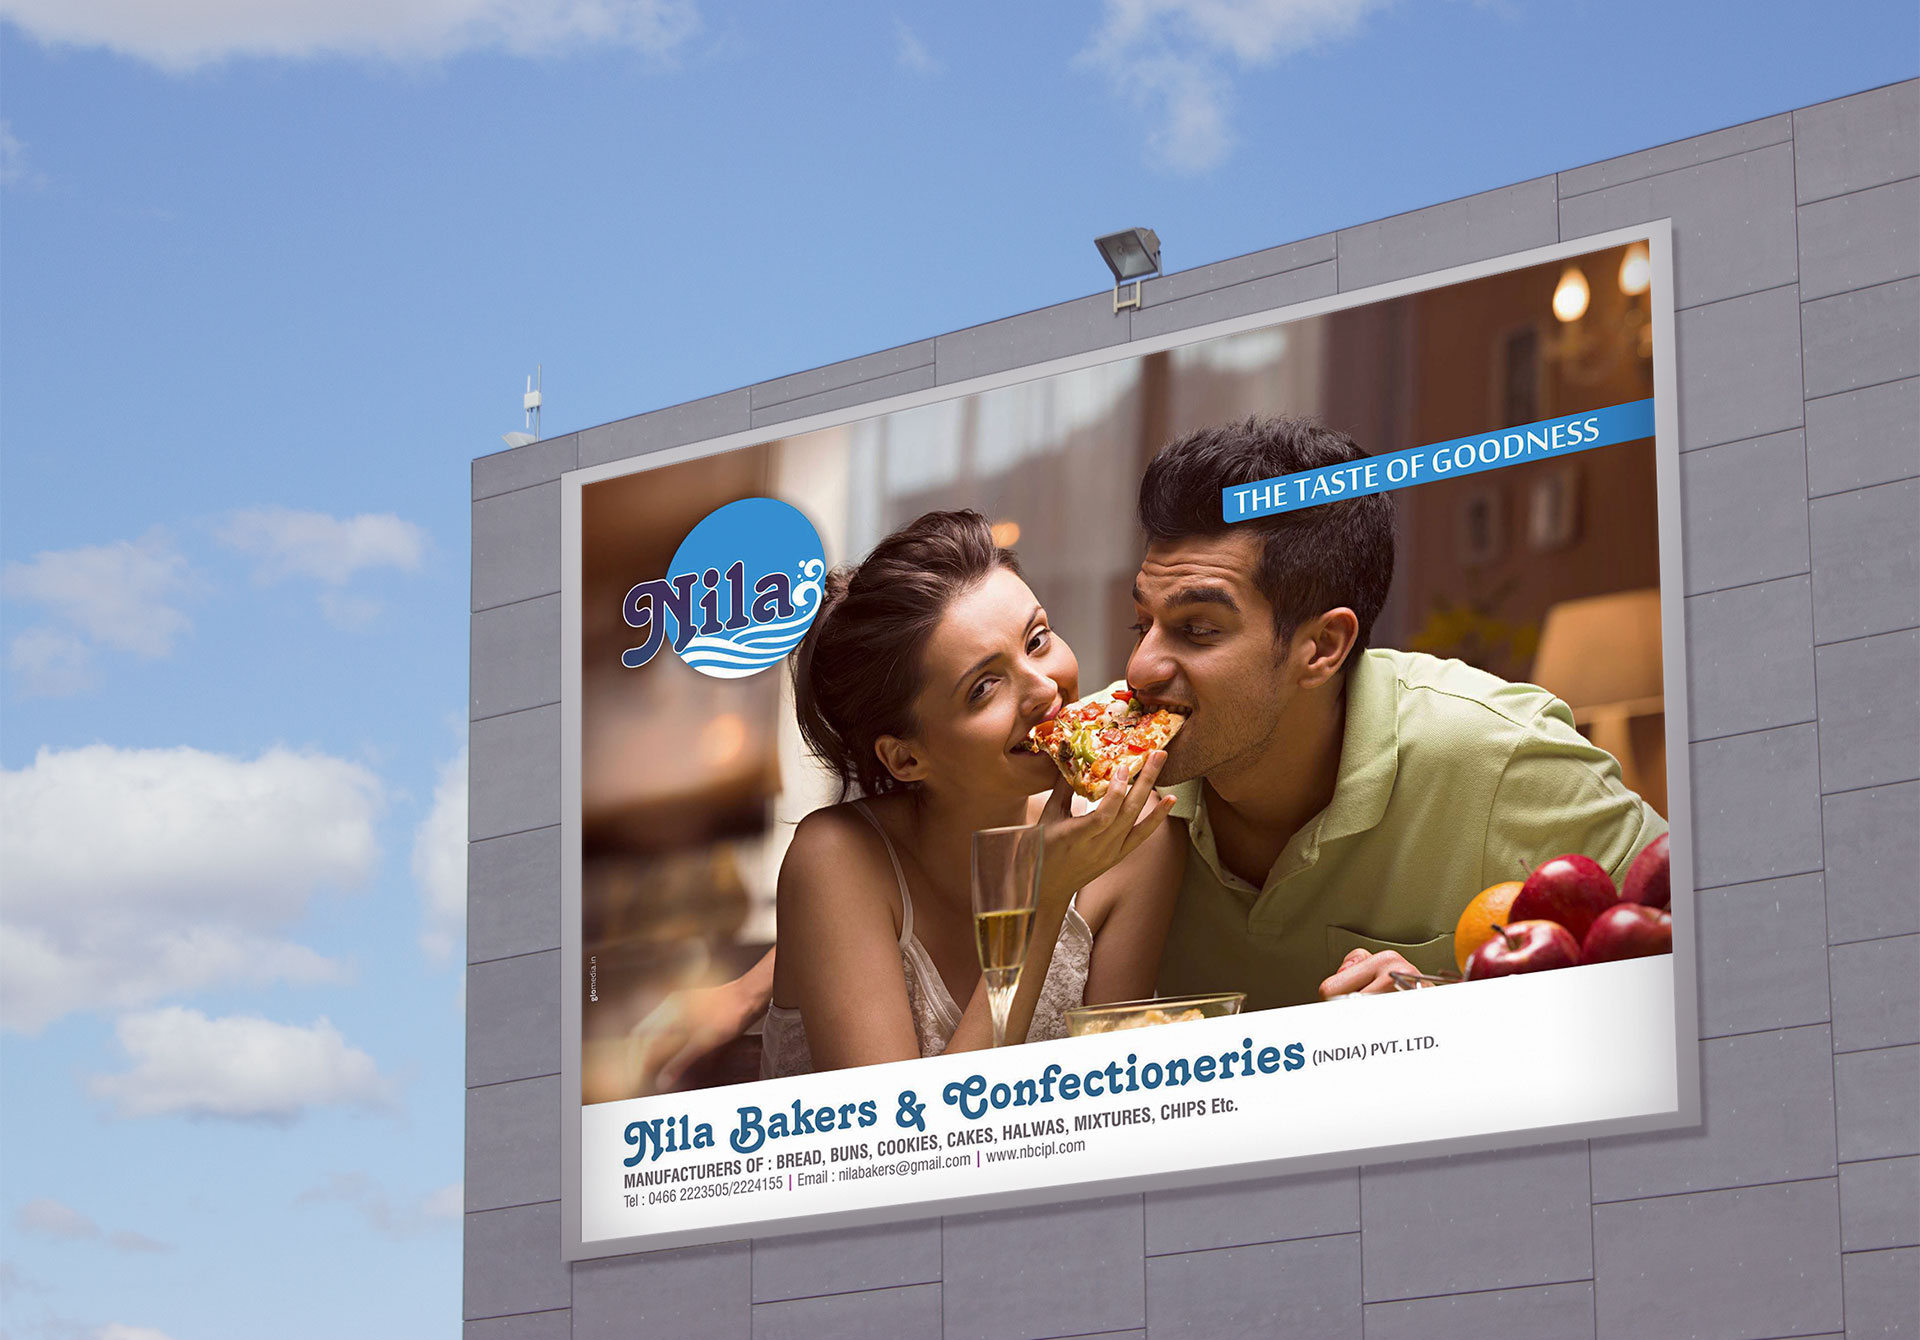 Couple sharing pizza - Nila Bakers and Confectionaries Billboard advertisement design